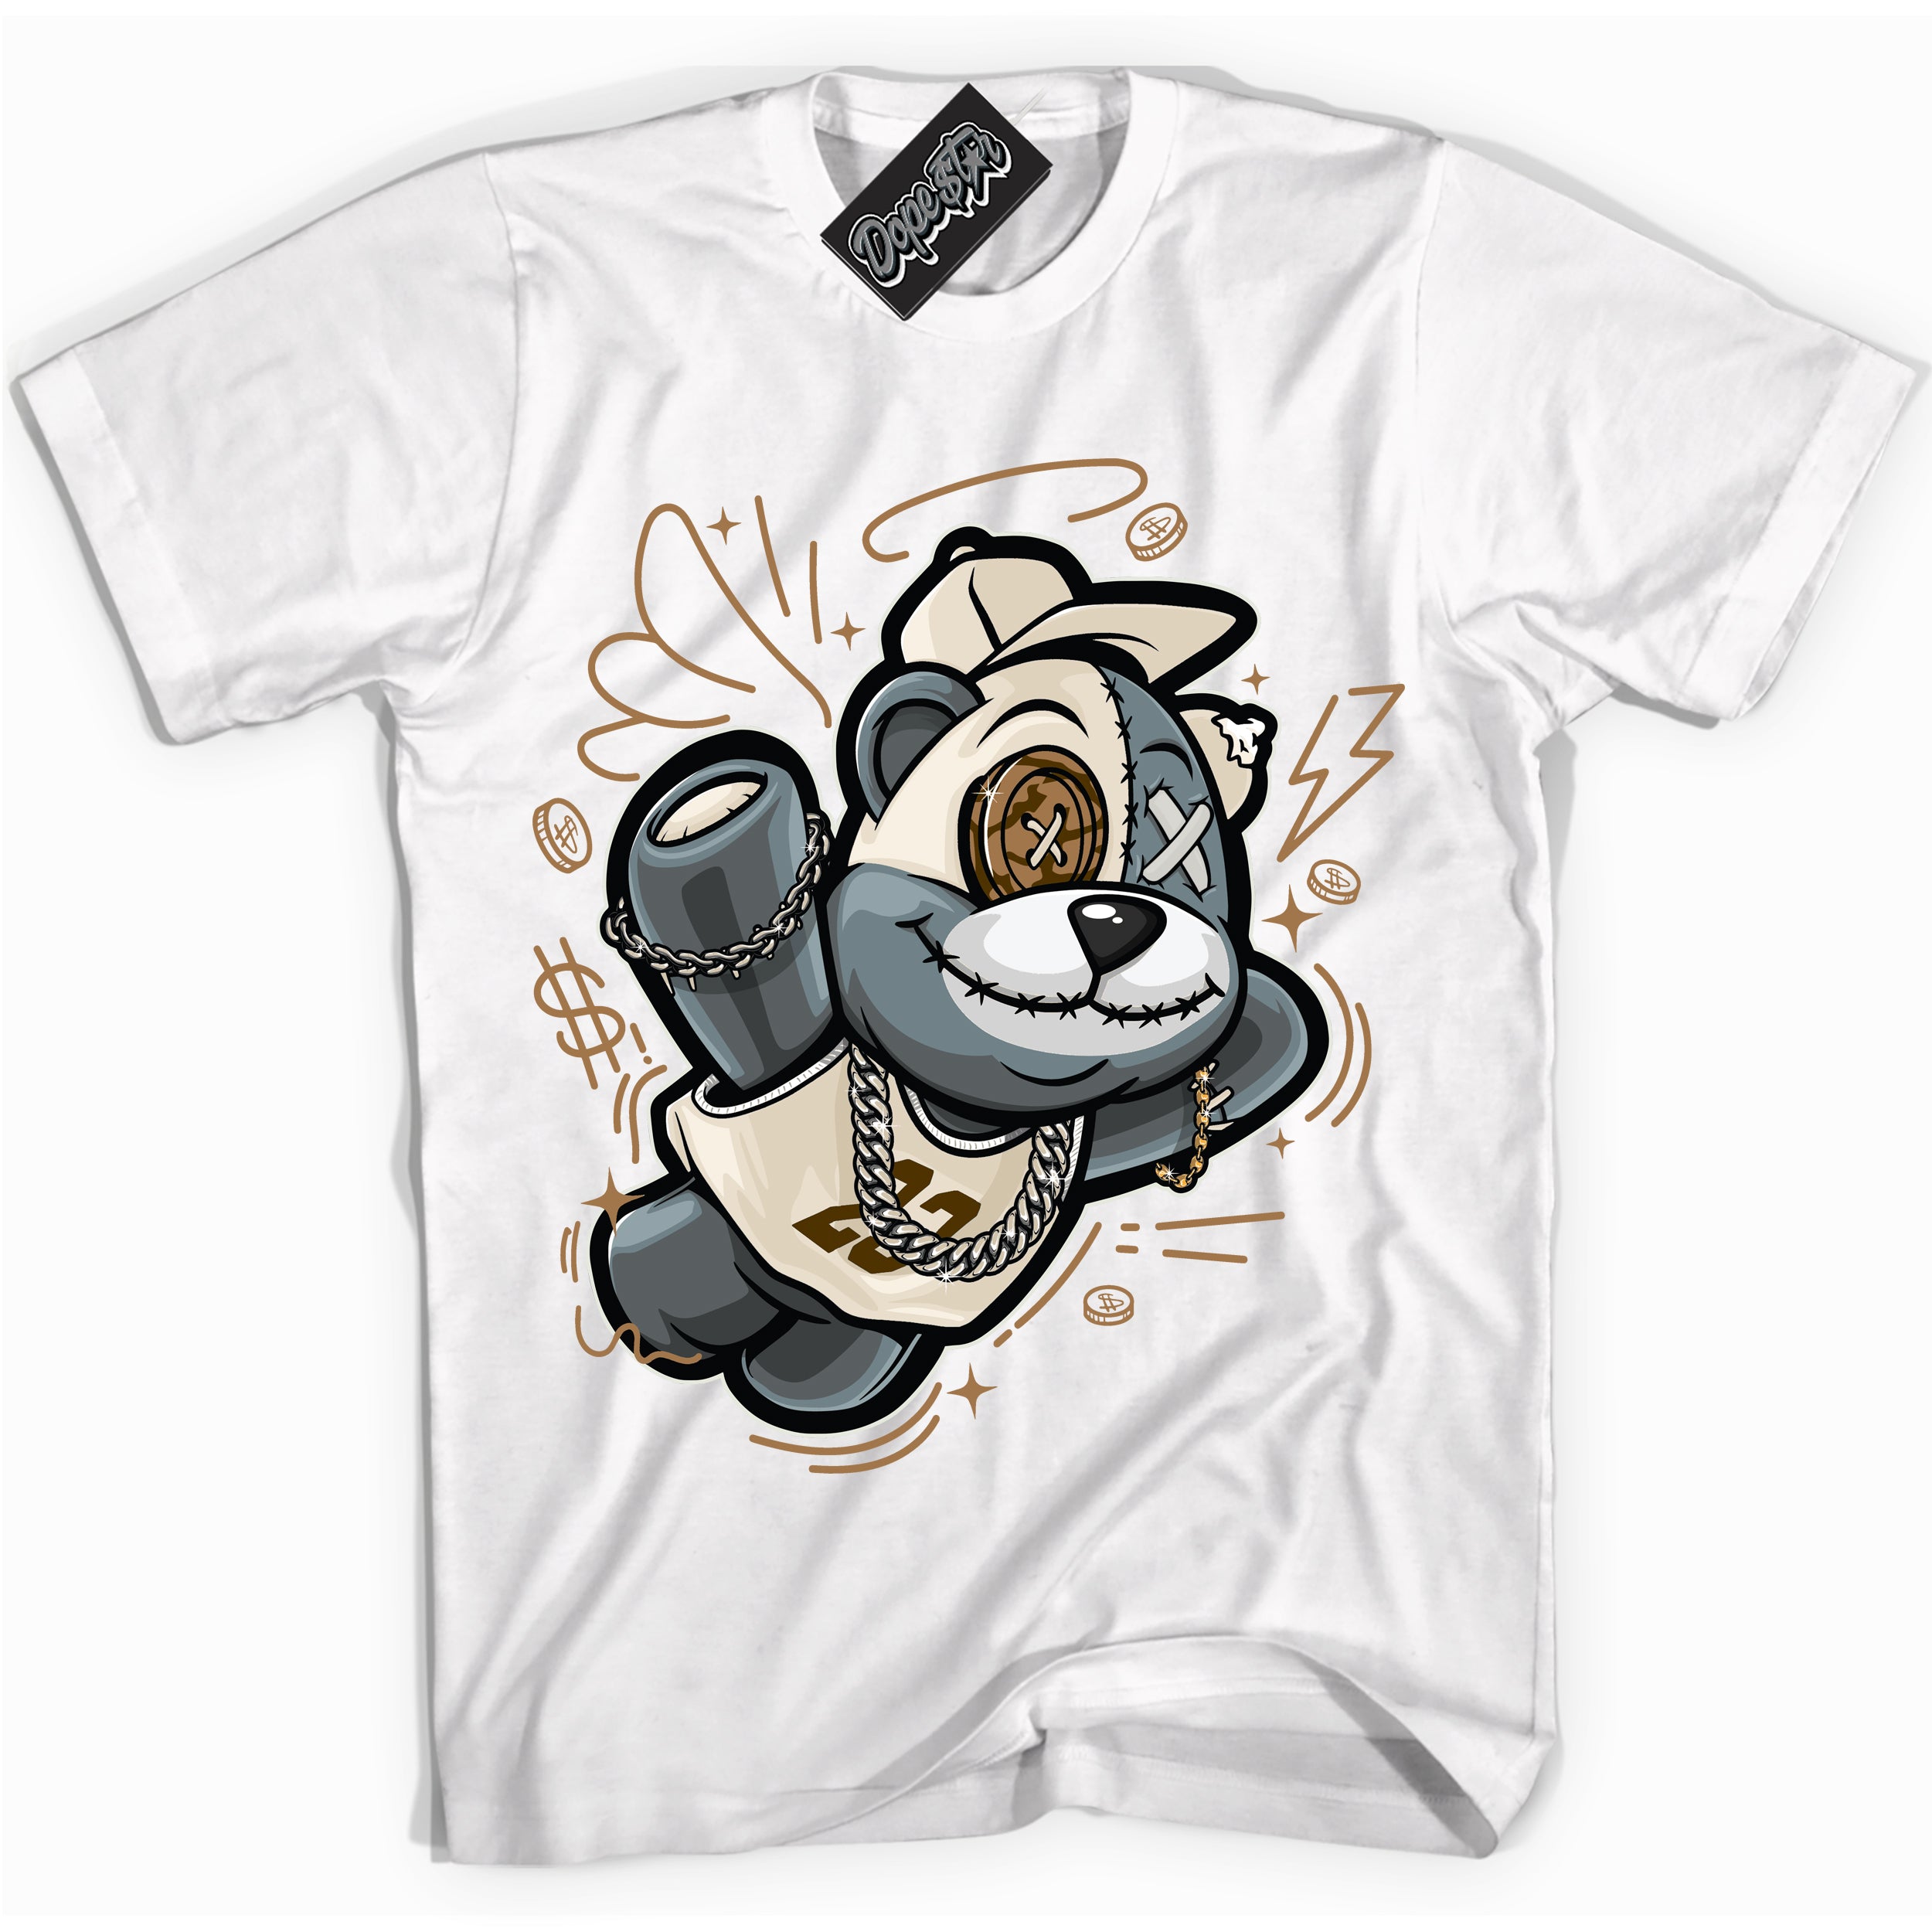 Cool White graphic tee with “ Slam Dunk Bear ” design, that perfectly matches Palomino 3s sneakers 